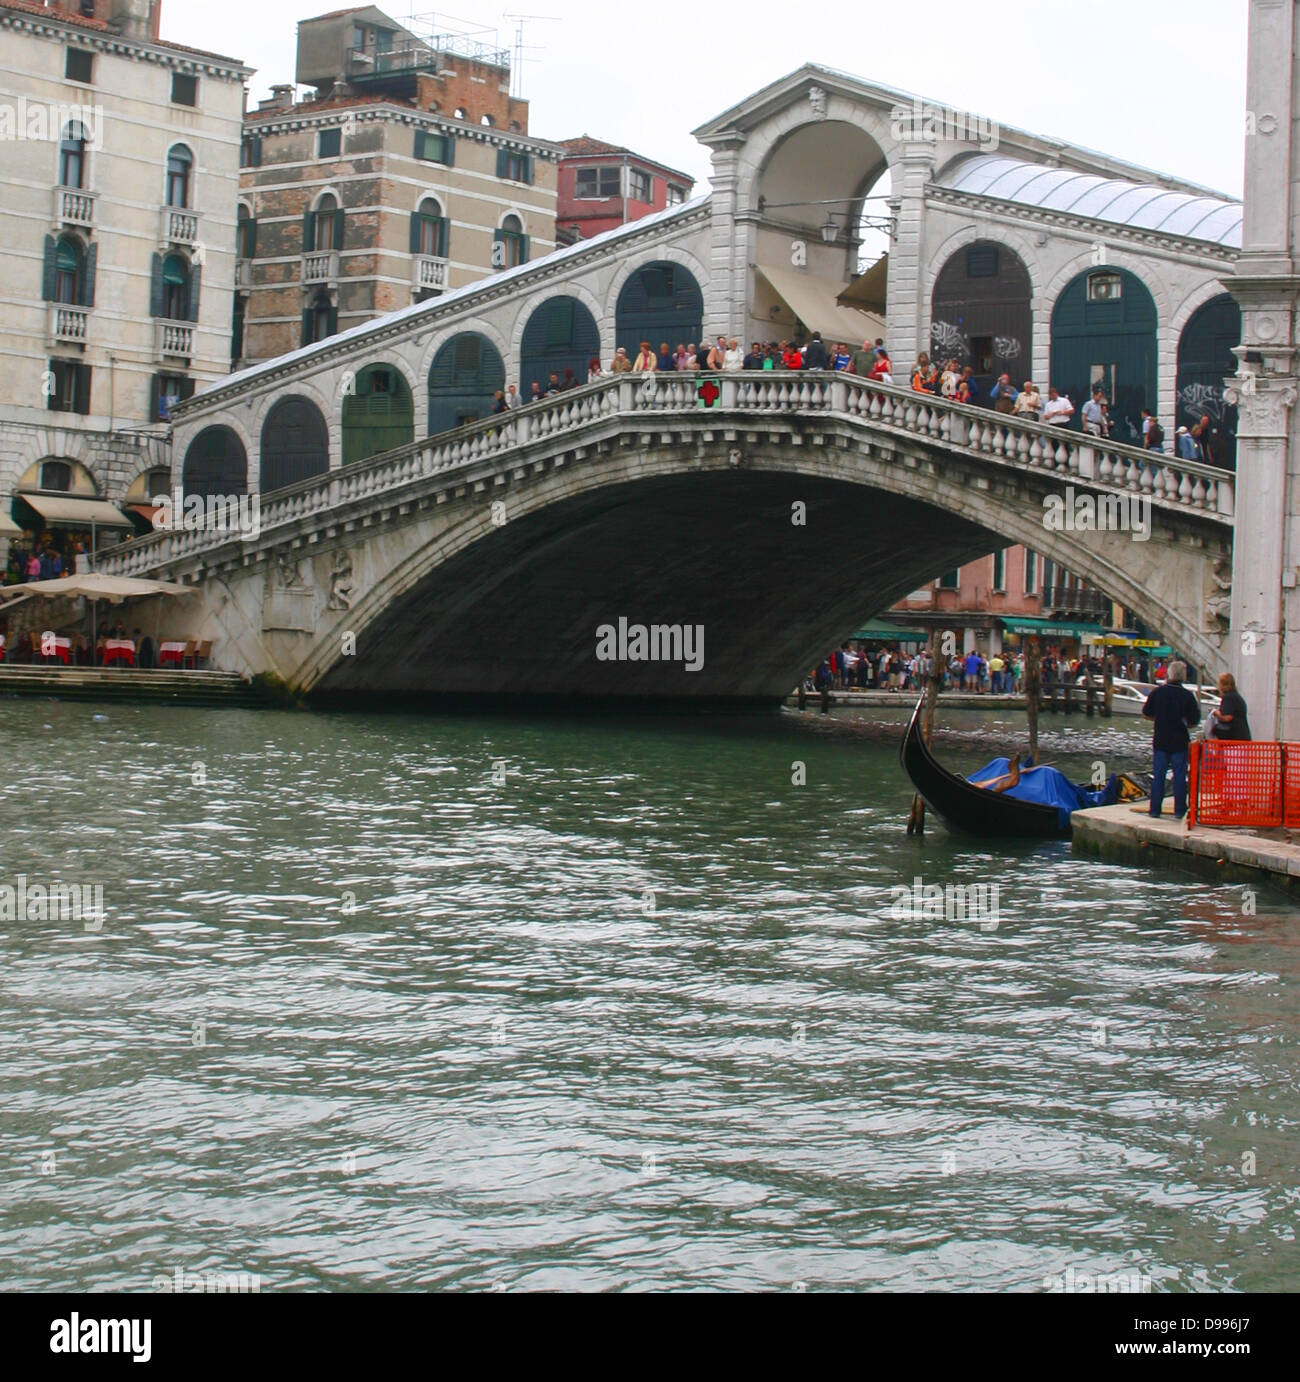 The Rialto Bridge (Italian: Ponte di Rialto) is one of the four bridges spanning the Grand Canal in Venice, Italy. It is the oldest bridge across the canal. The present stone bridge, a single span designed by Antonio da Ponte, was finally completed in 1591. Stock Photo